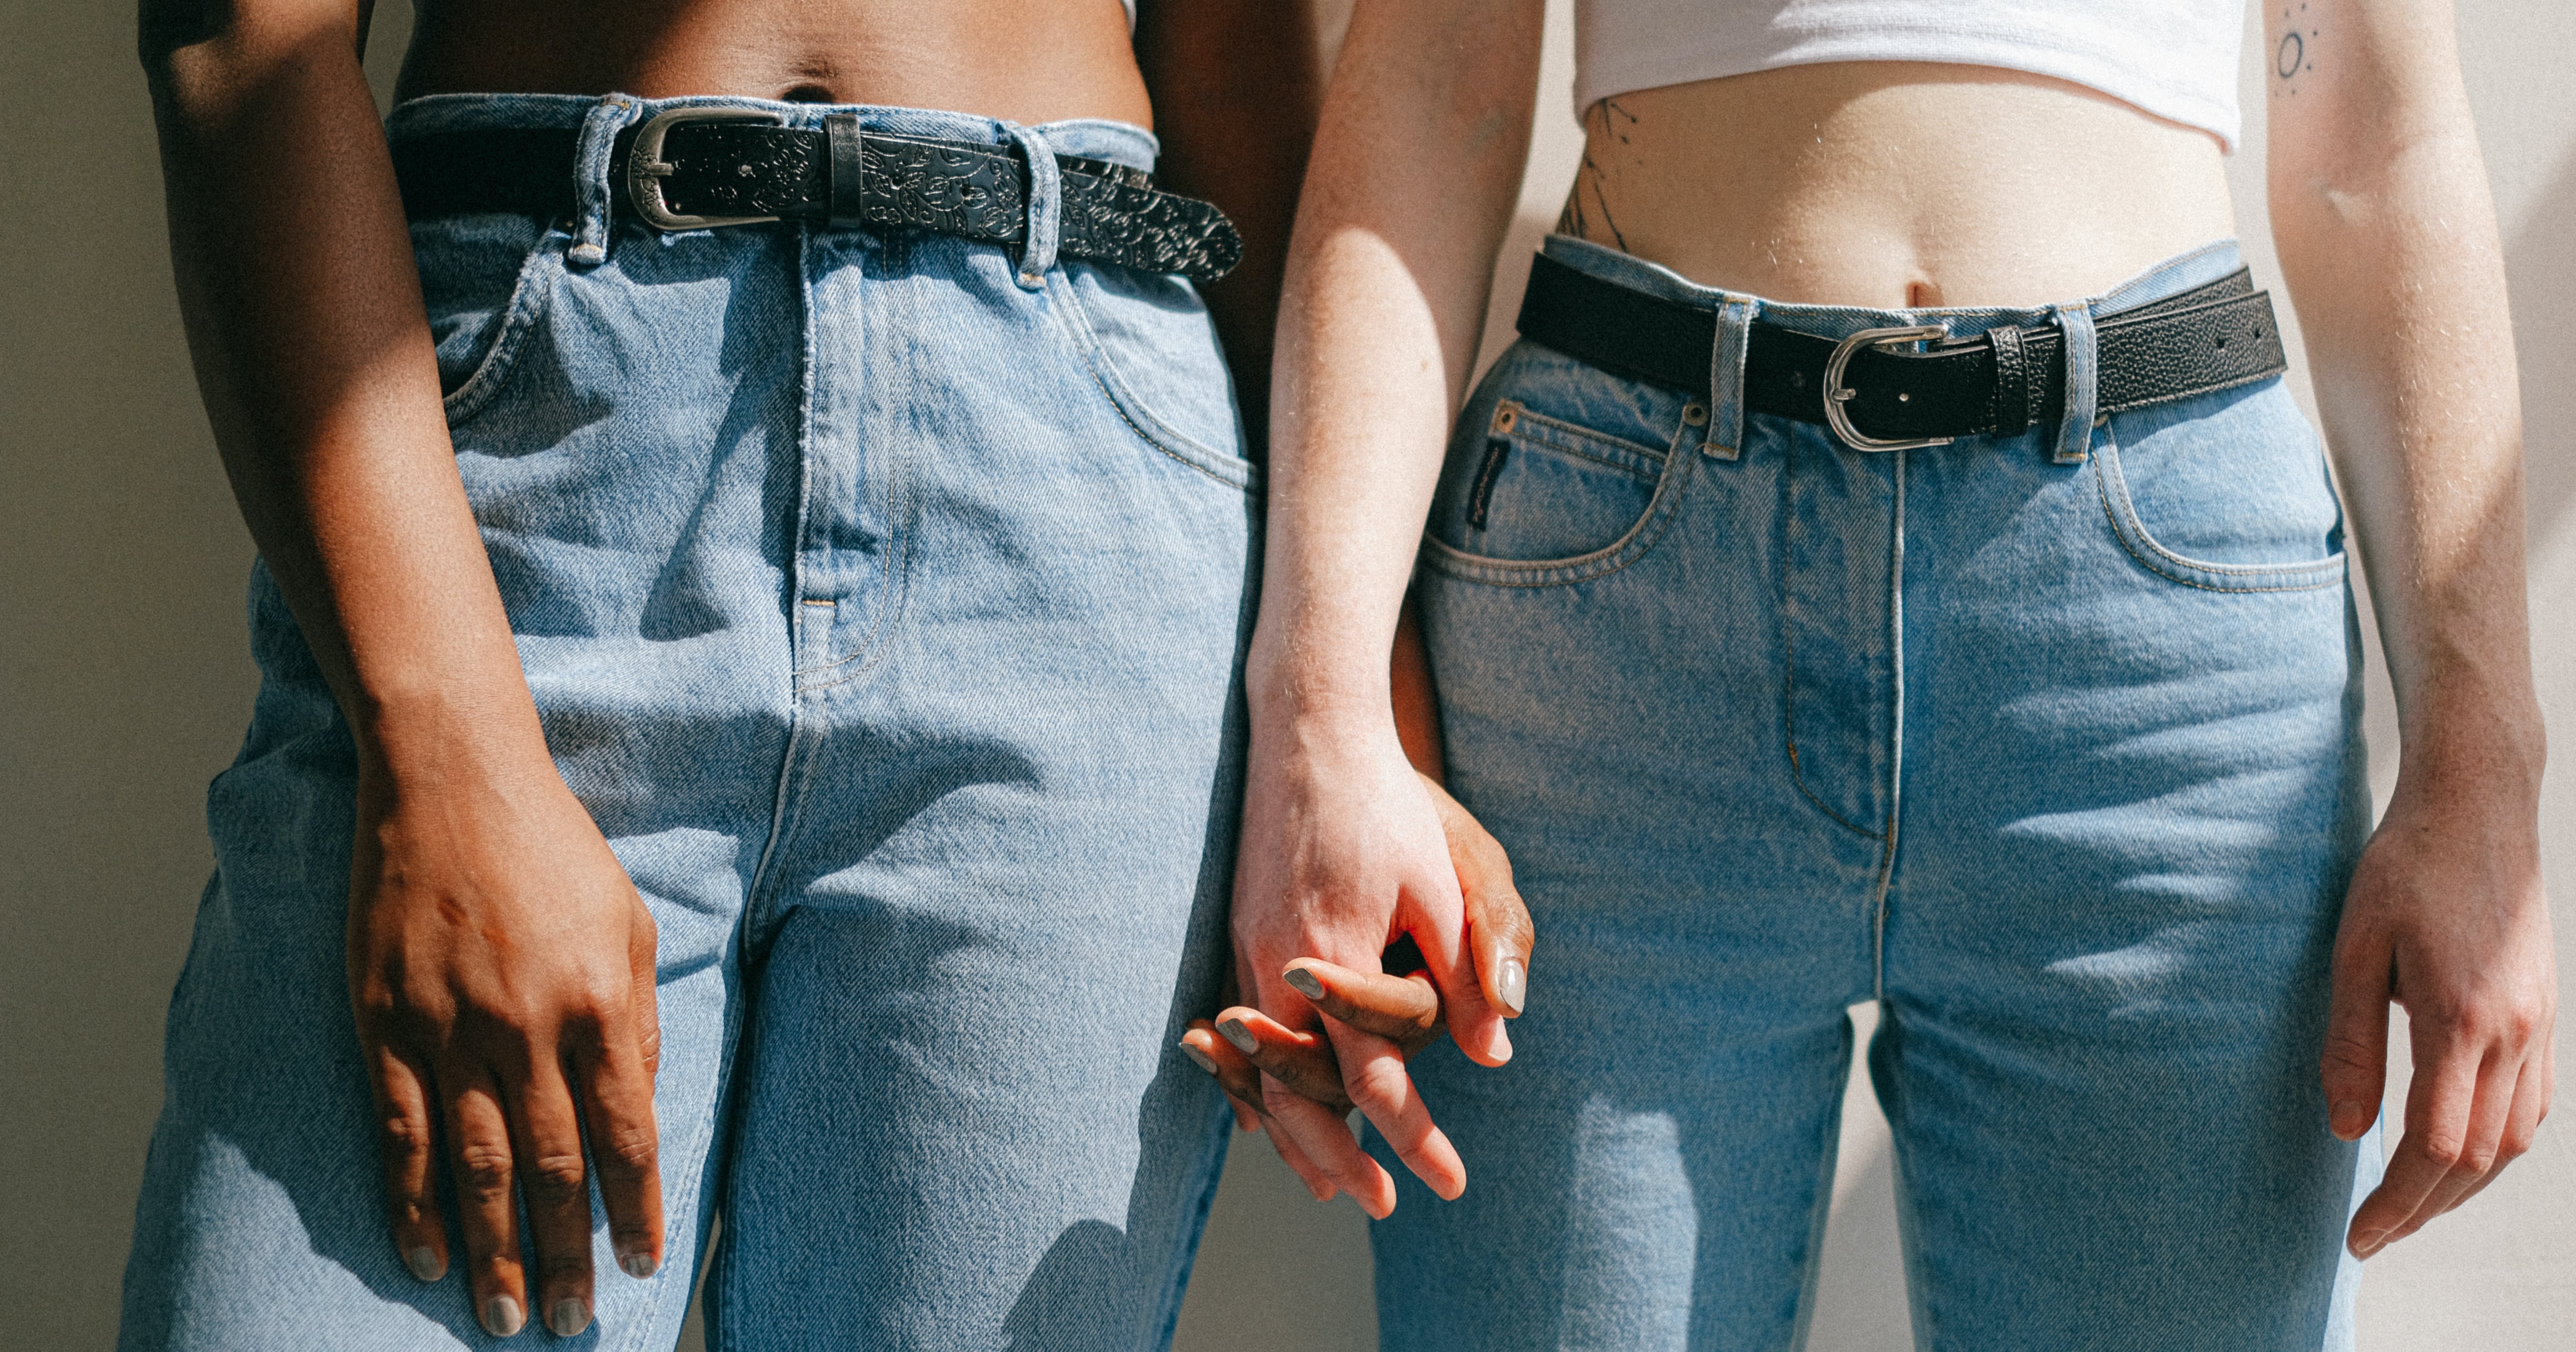 Gen Z, Here's the Real Skinny on Why Millennials Wear Skinny Jeans